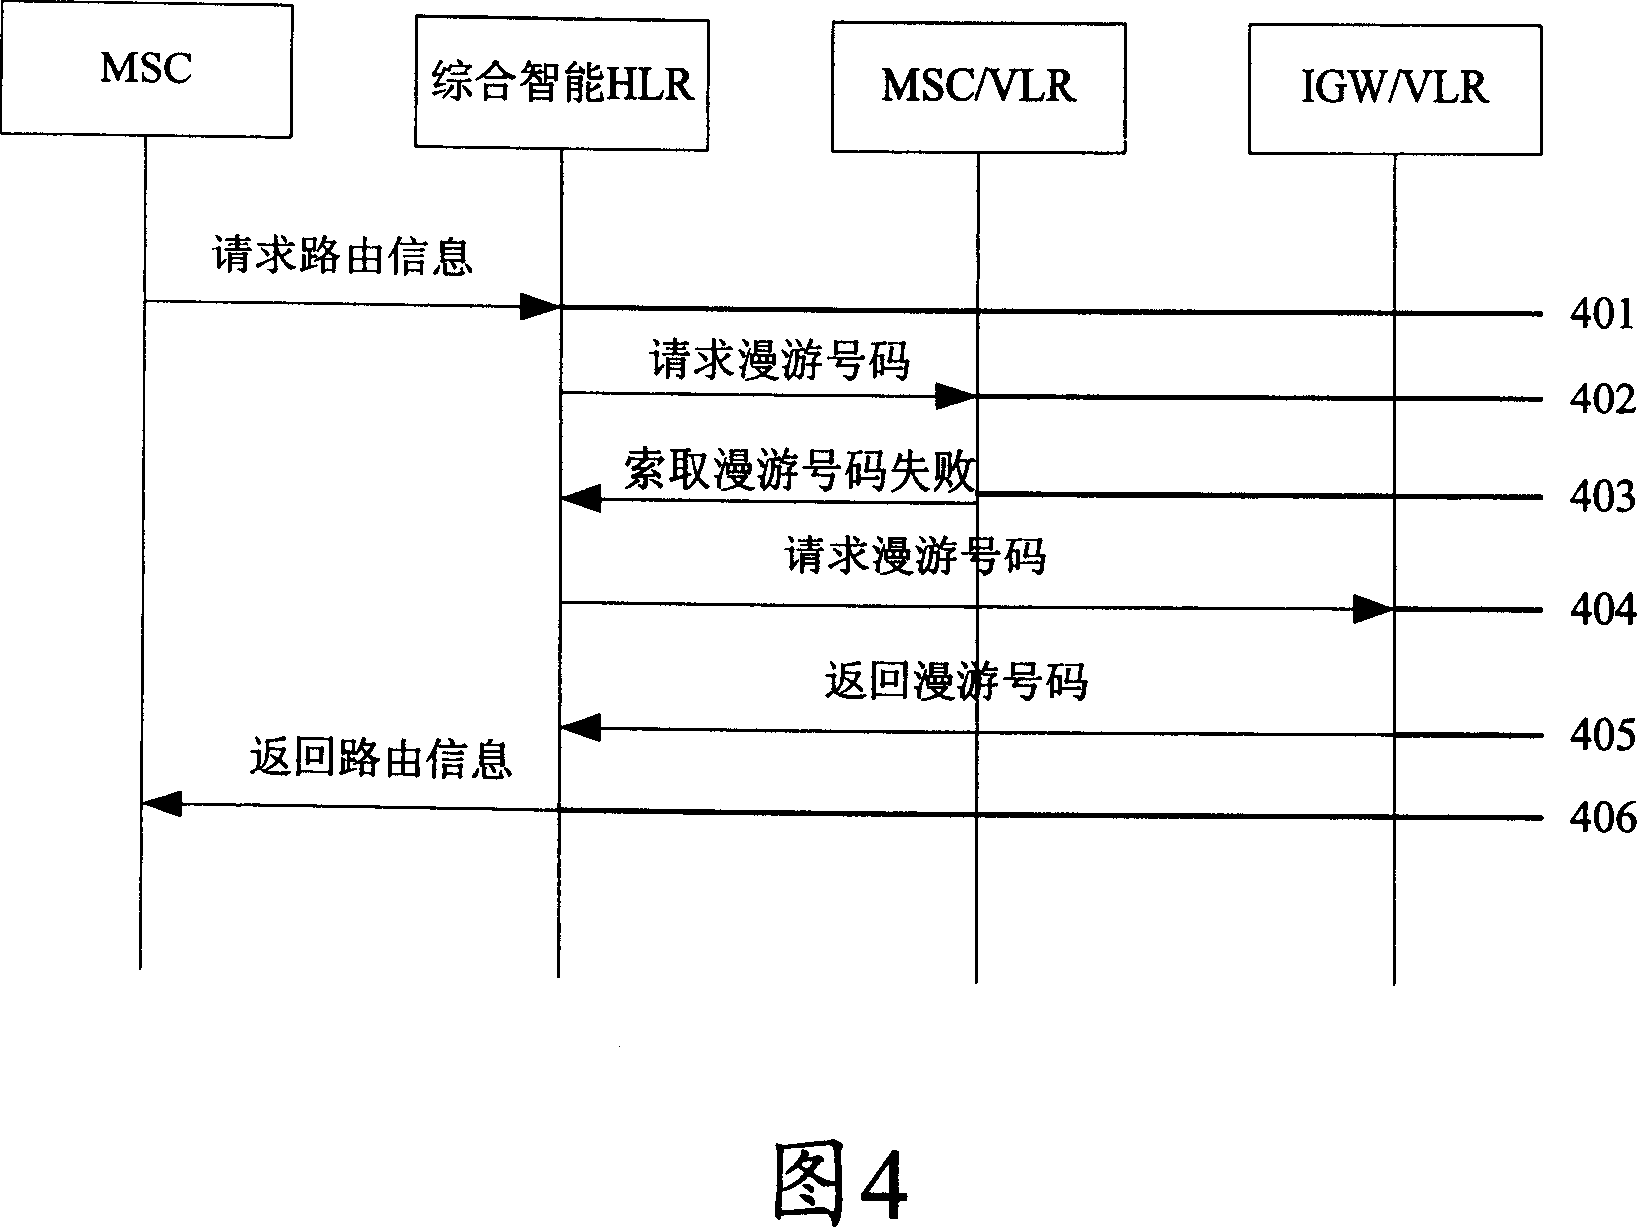 Method for implementing network access for PCS user, and 3G user with one number and dual standby functions